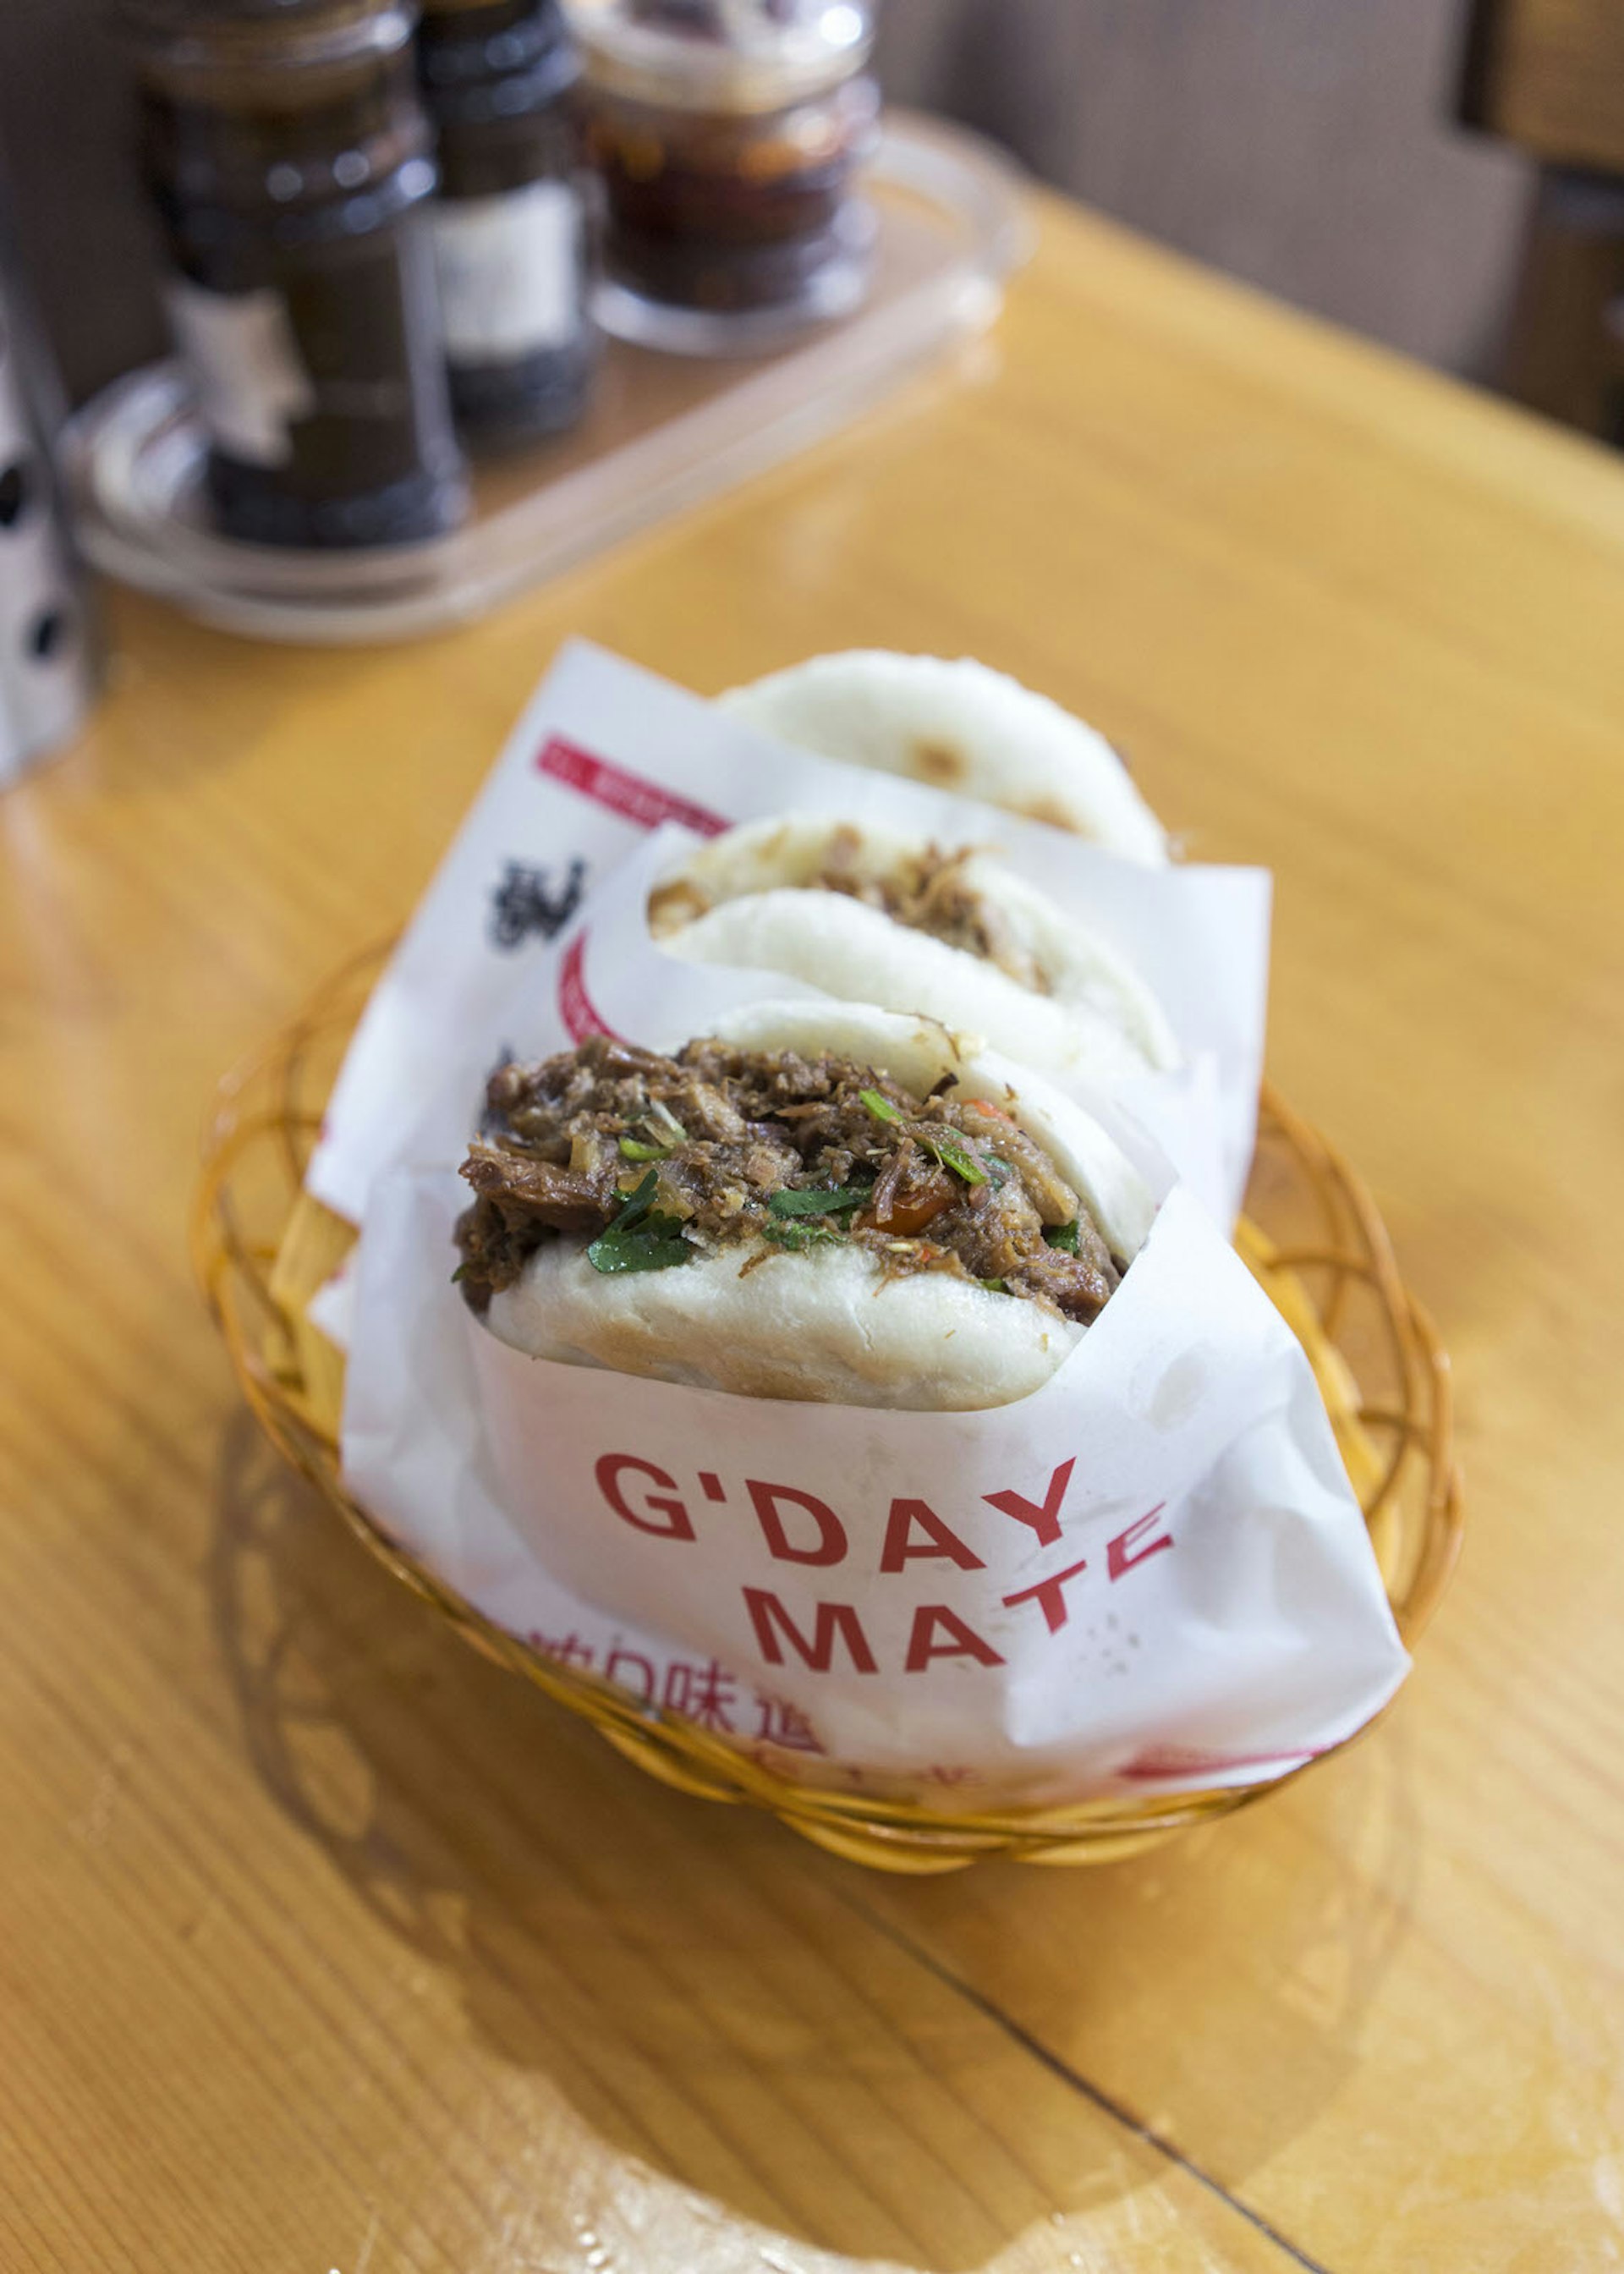 A close up shot of rou jia mo served in EJ Fine Food restaurant in Melbourne. It is a type of bao bun, served wrapped in paper that has 'G'DAY MATE' and some script writing in red printed on it, in an orange basket. The white buns are stuffed with brown meat and vegetables.